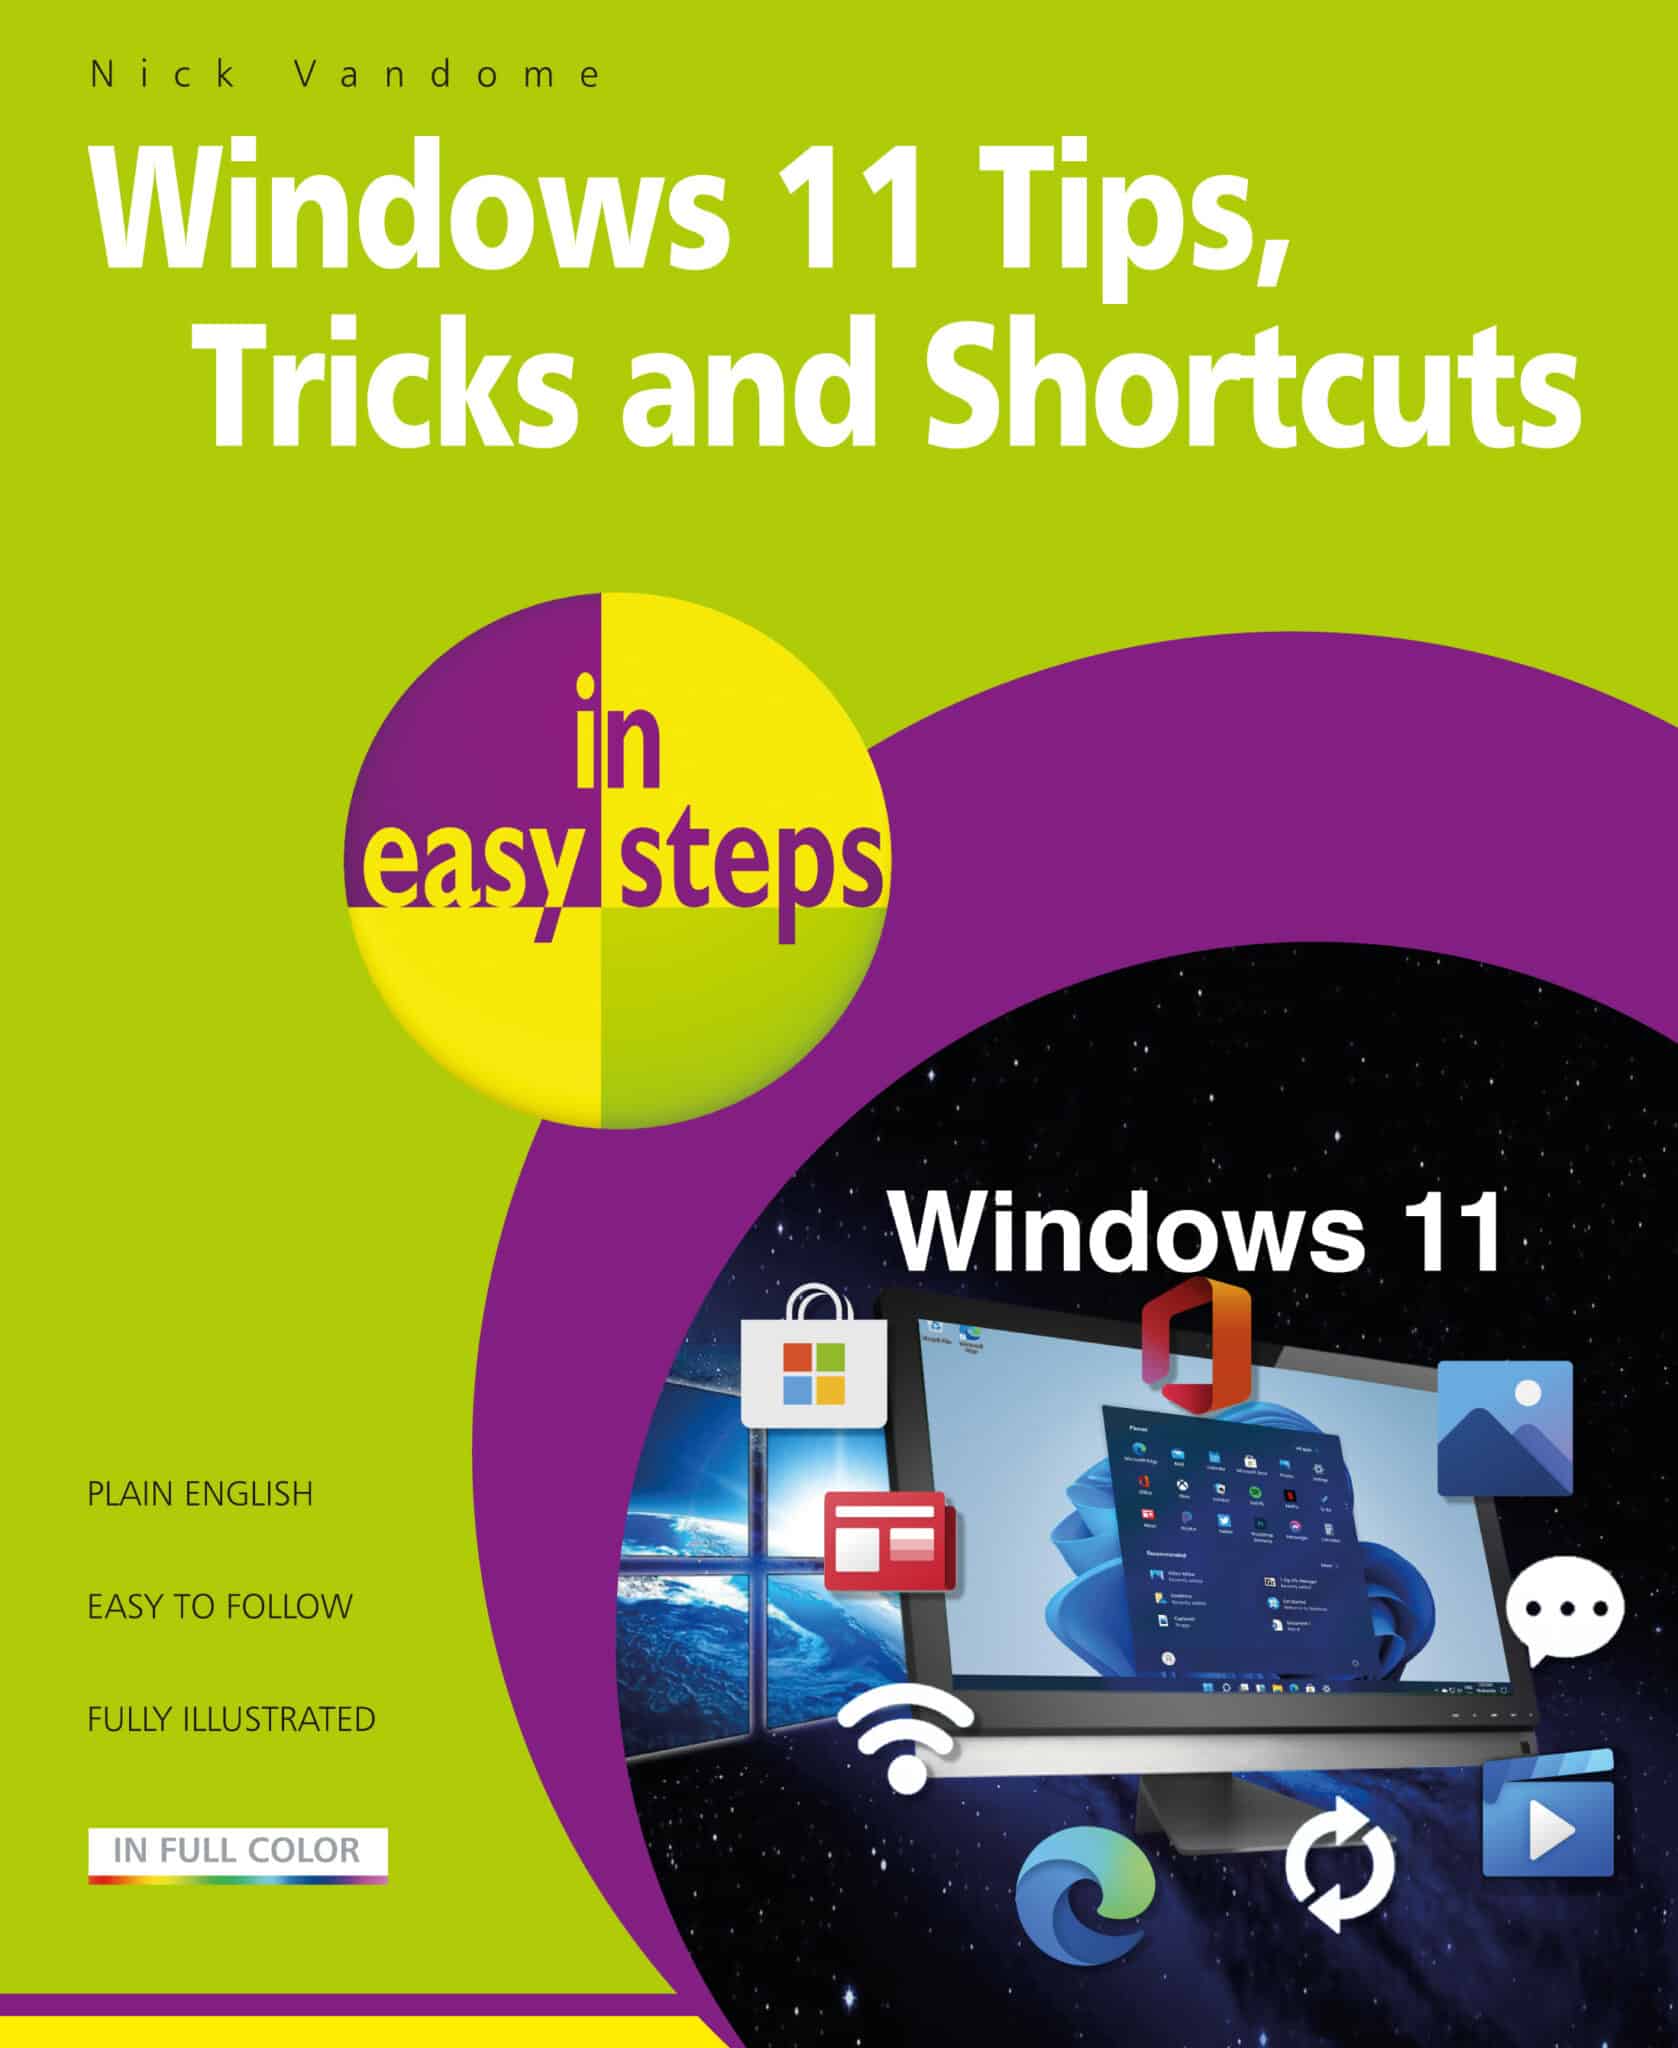 Windows 11 Tips, Tricks & Shortcuts in easy steps 9781840789973 front cover